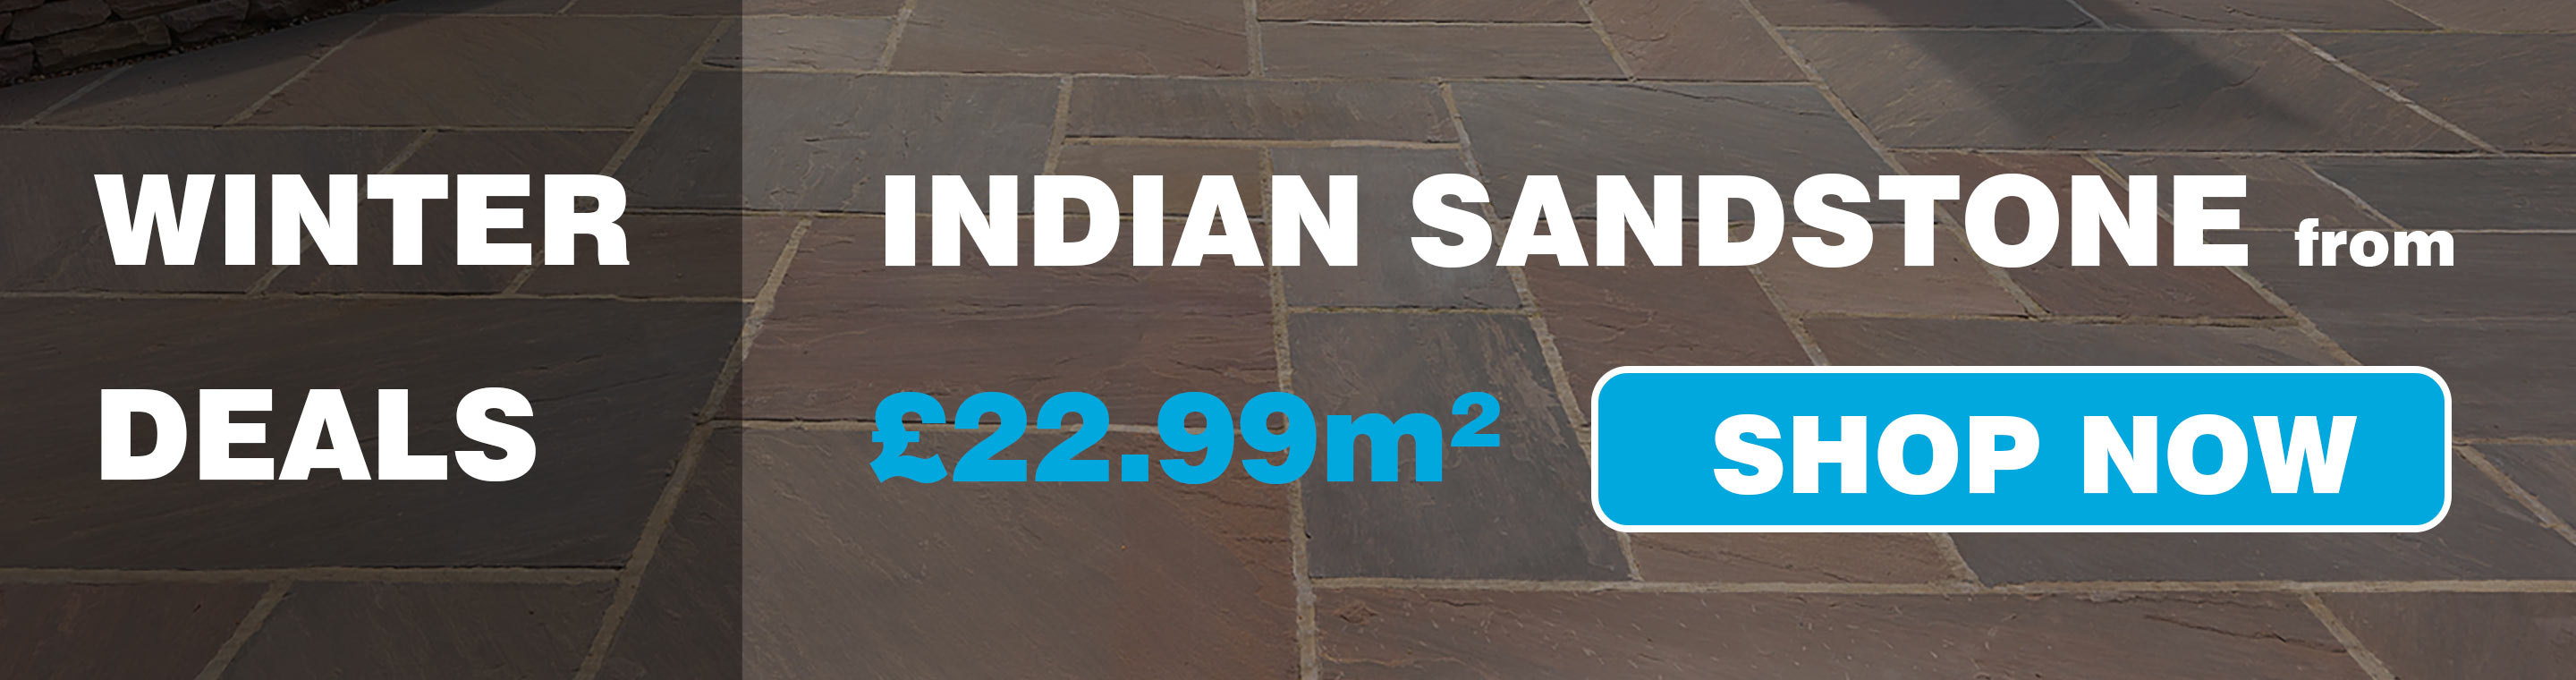 Winter Deals - Indian Sandstone from £29.99 - Shop Now & Save